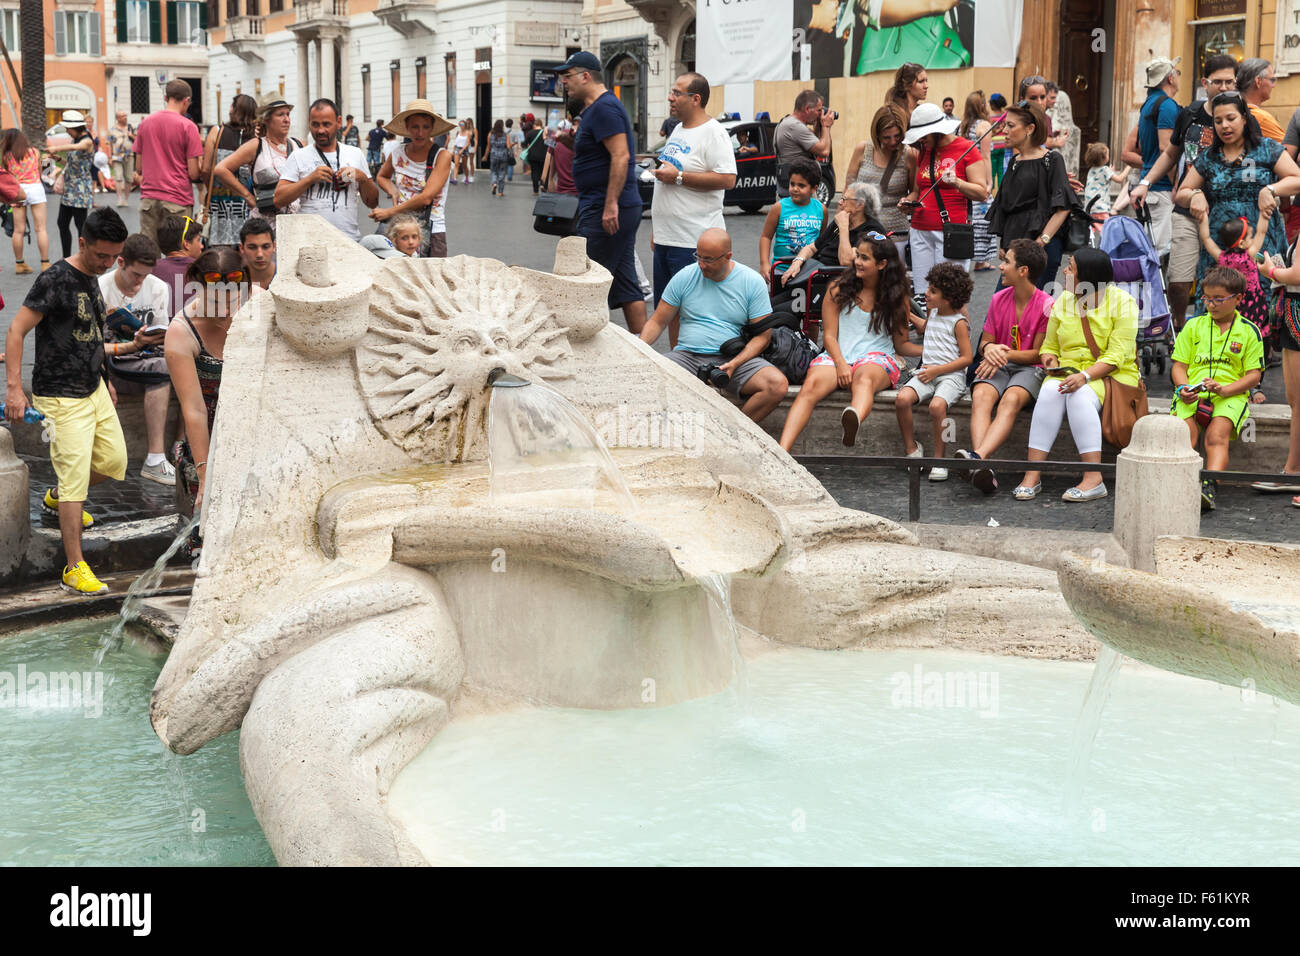 Rome, Italy - August 7, 2015: Crowd of tourists relaxing near Fontana della Barcaccia  on the Piazza di Spagna, hot summer day Stock Photo